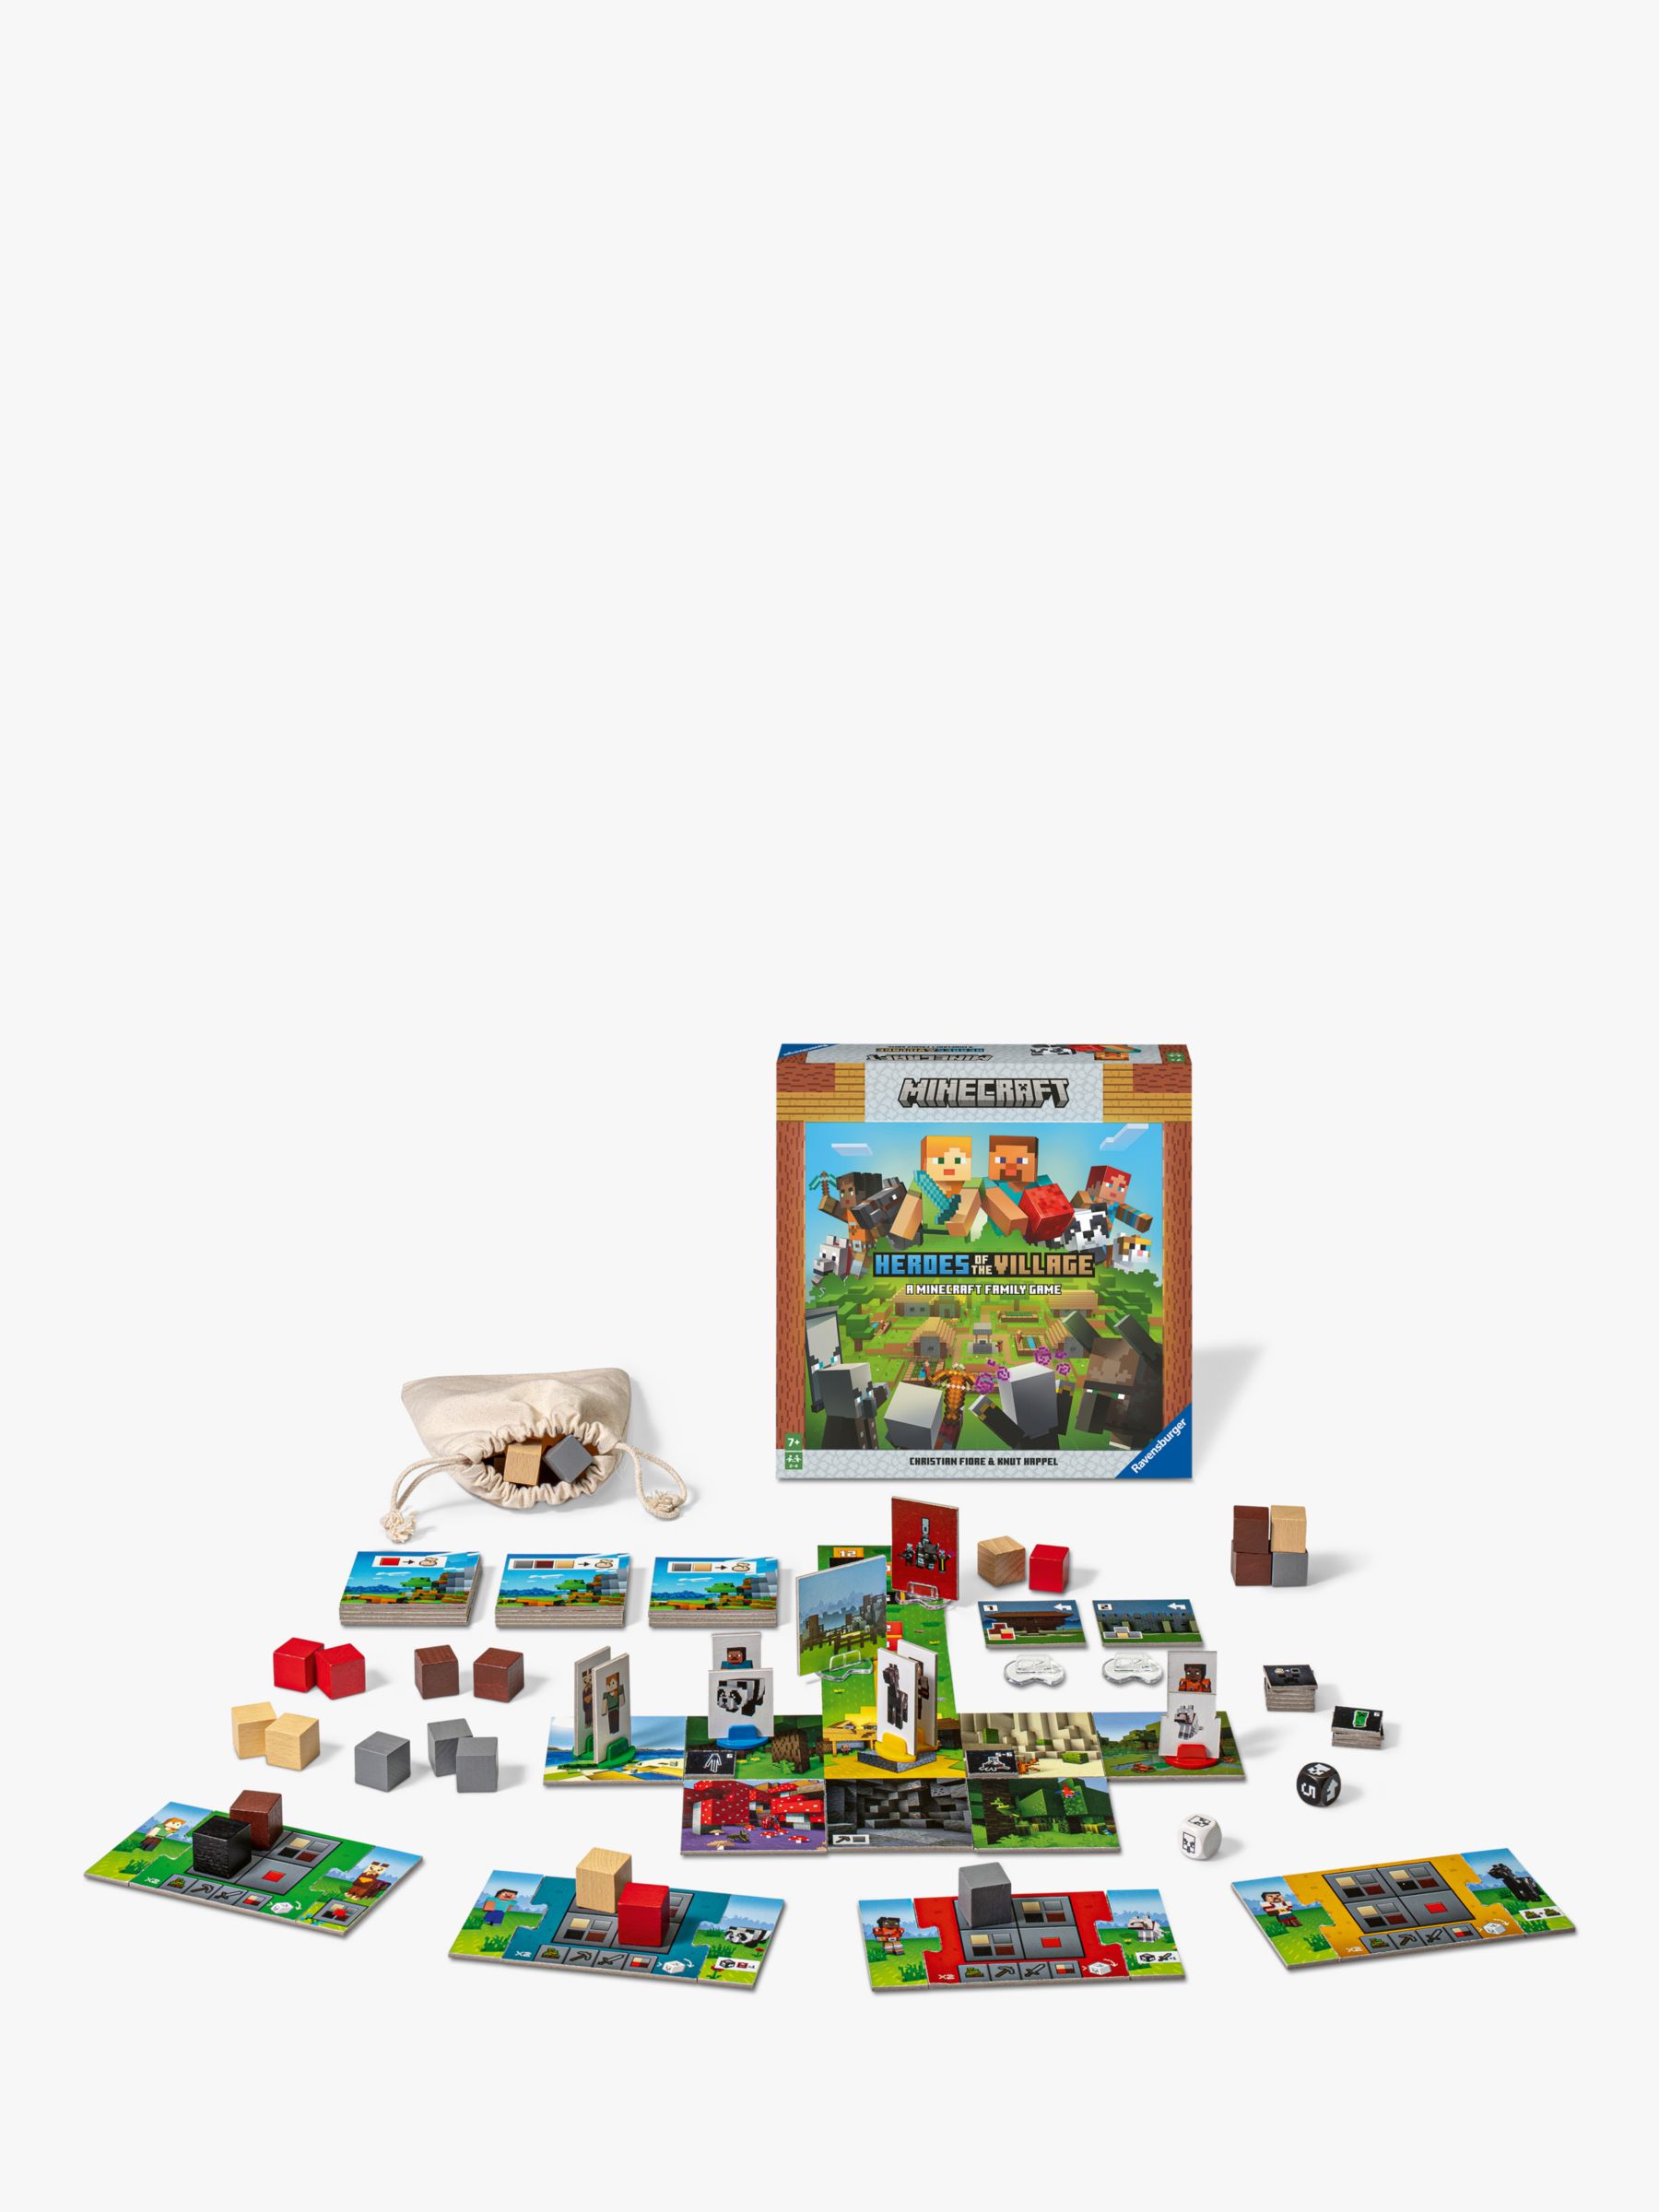 Ravensburger Minecraft Heroes of the Village Board Game